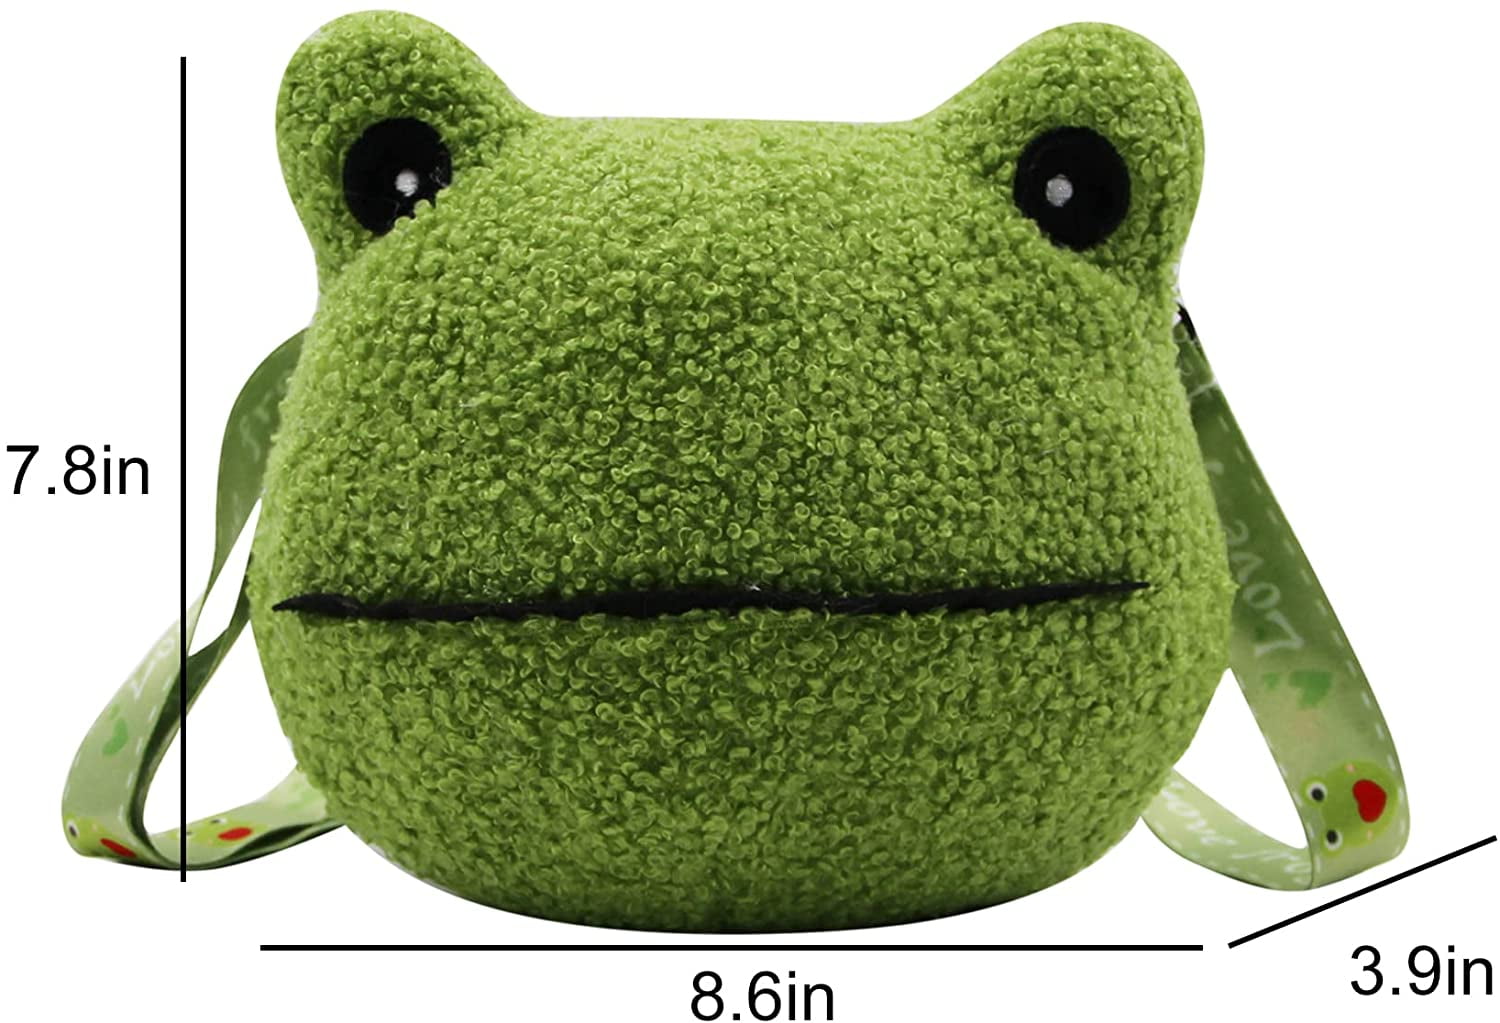 Buy Green Frog Baby Bag Stuffed Soft Plush Toy Online at Lowest